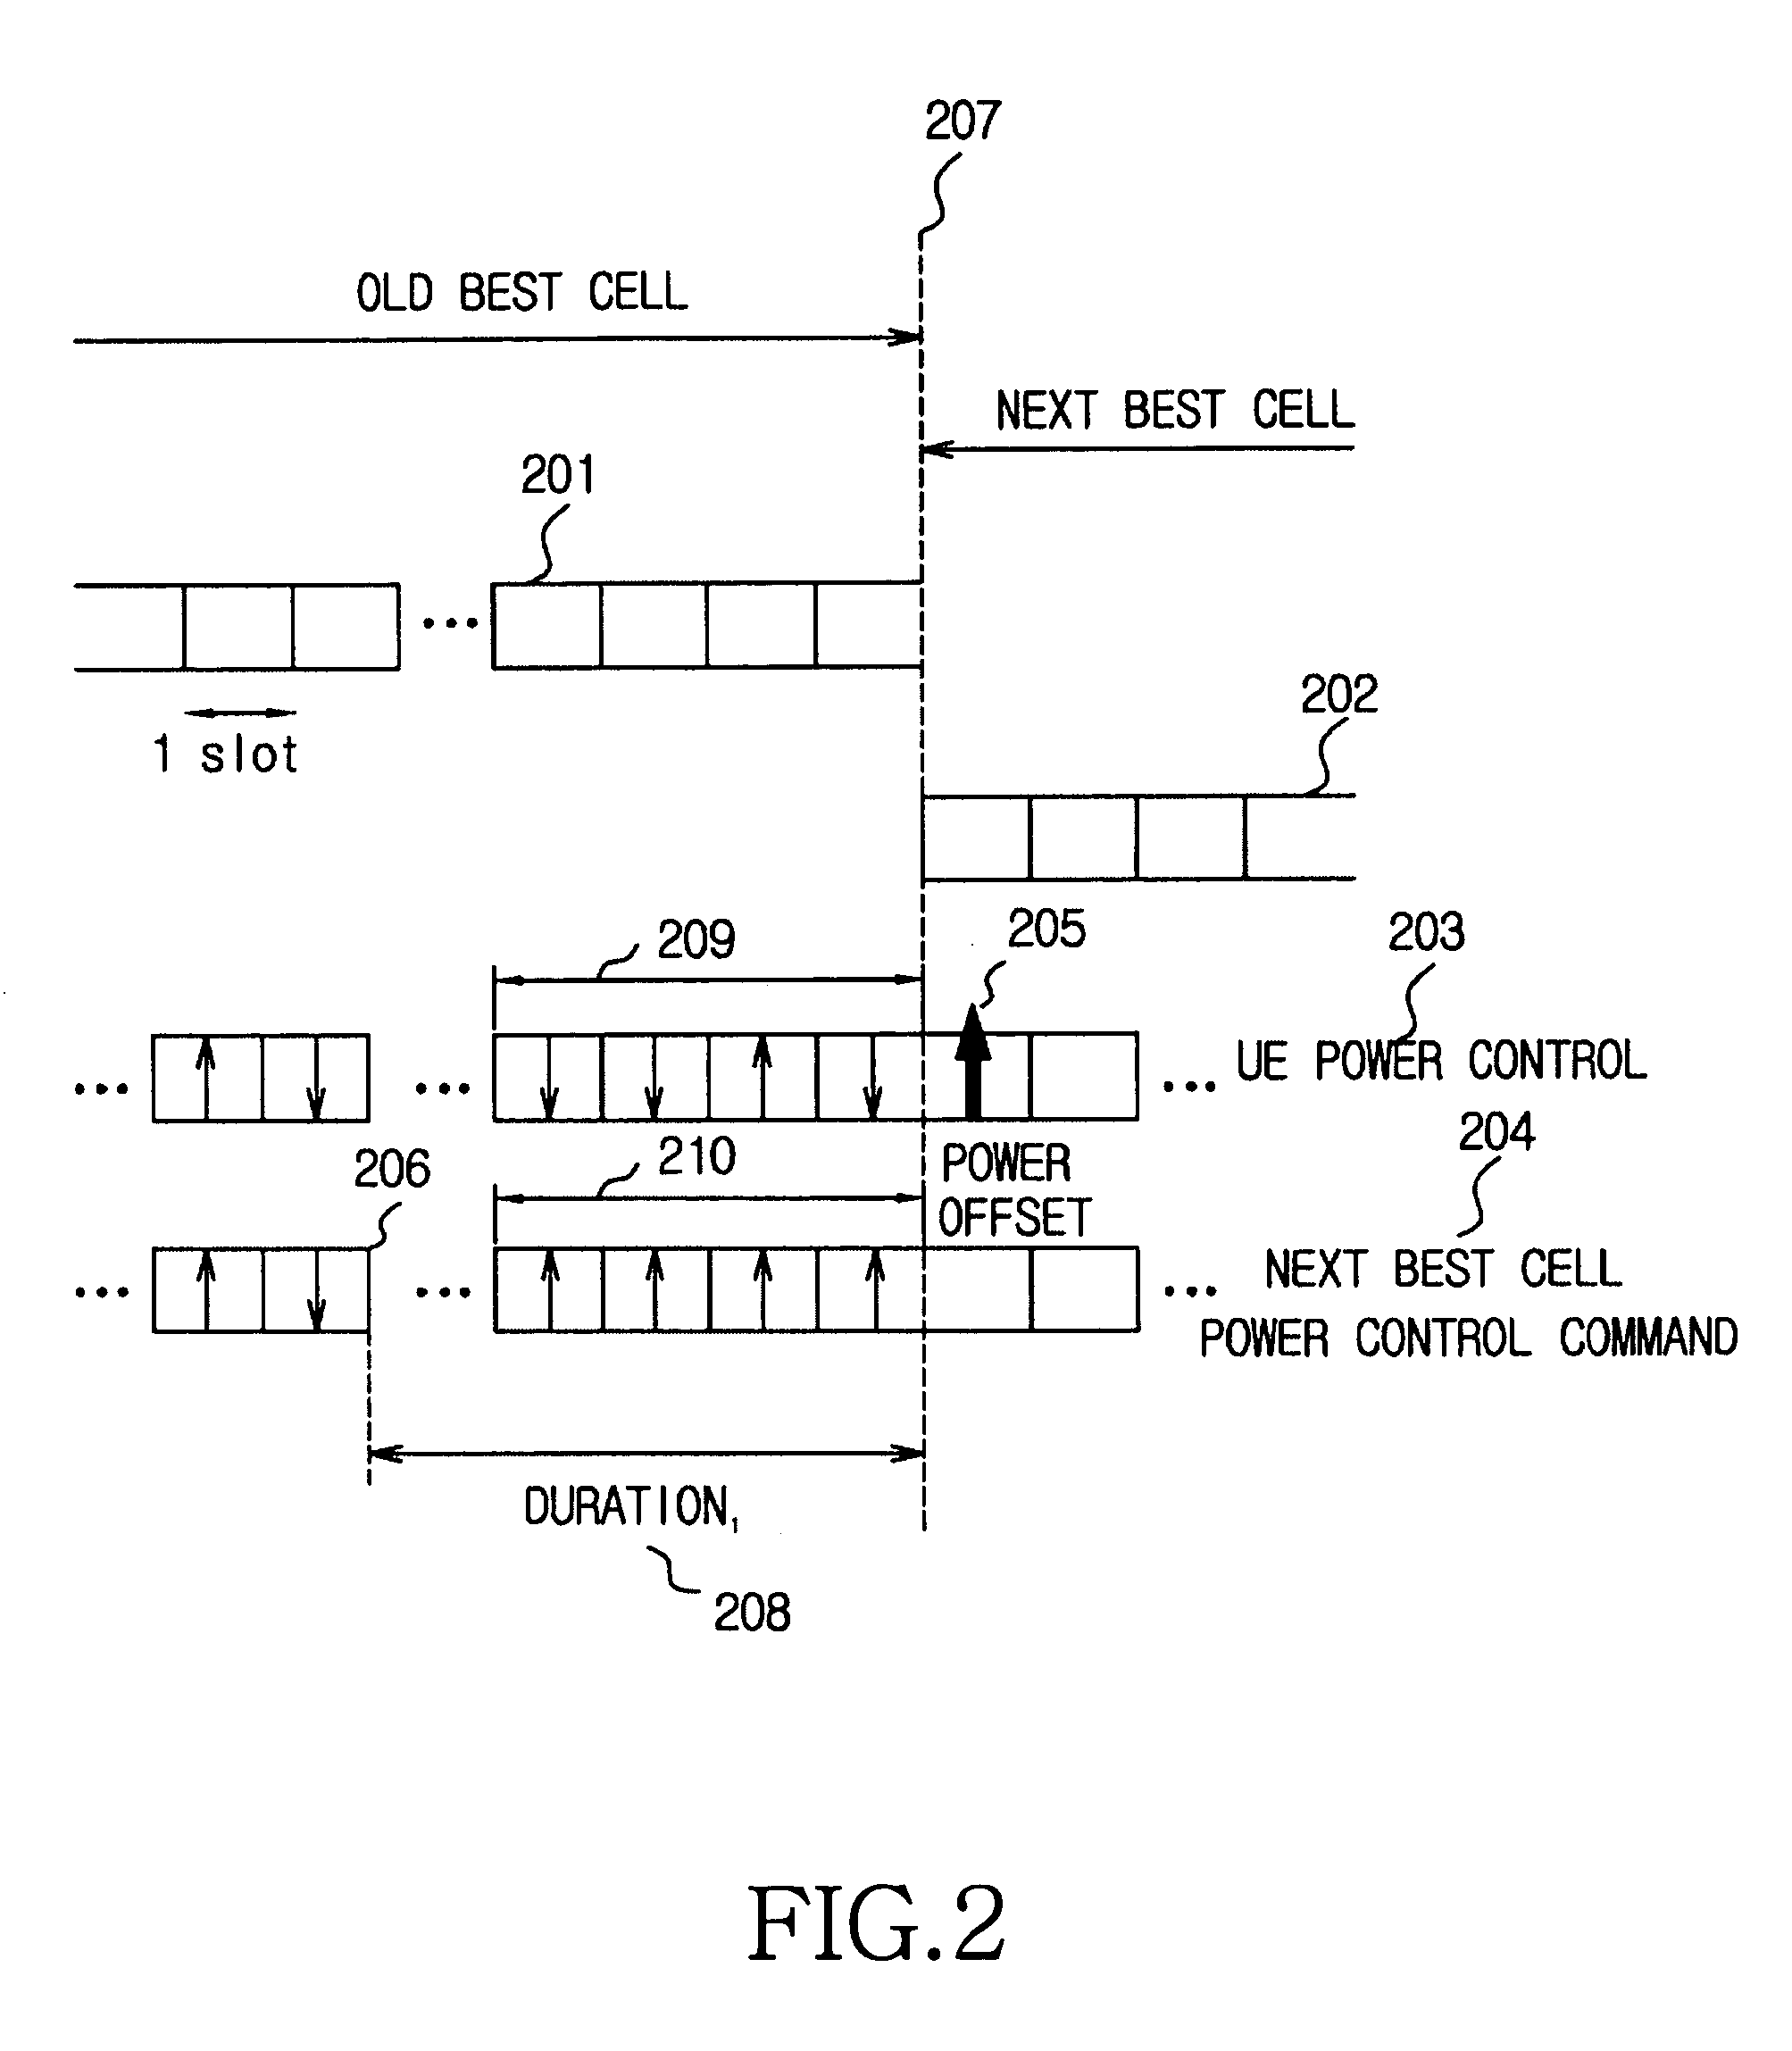 Power control apparatus and method for a W-CDMA communication system employing a high-speed downlink packet access scheme